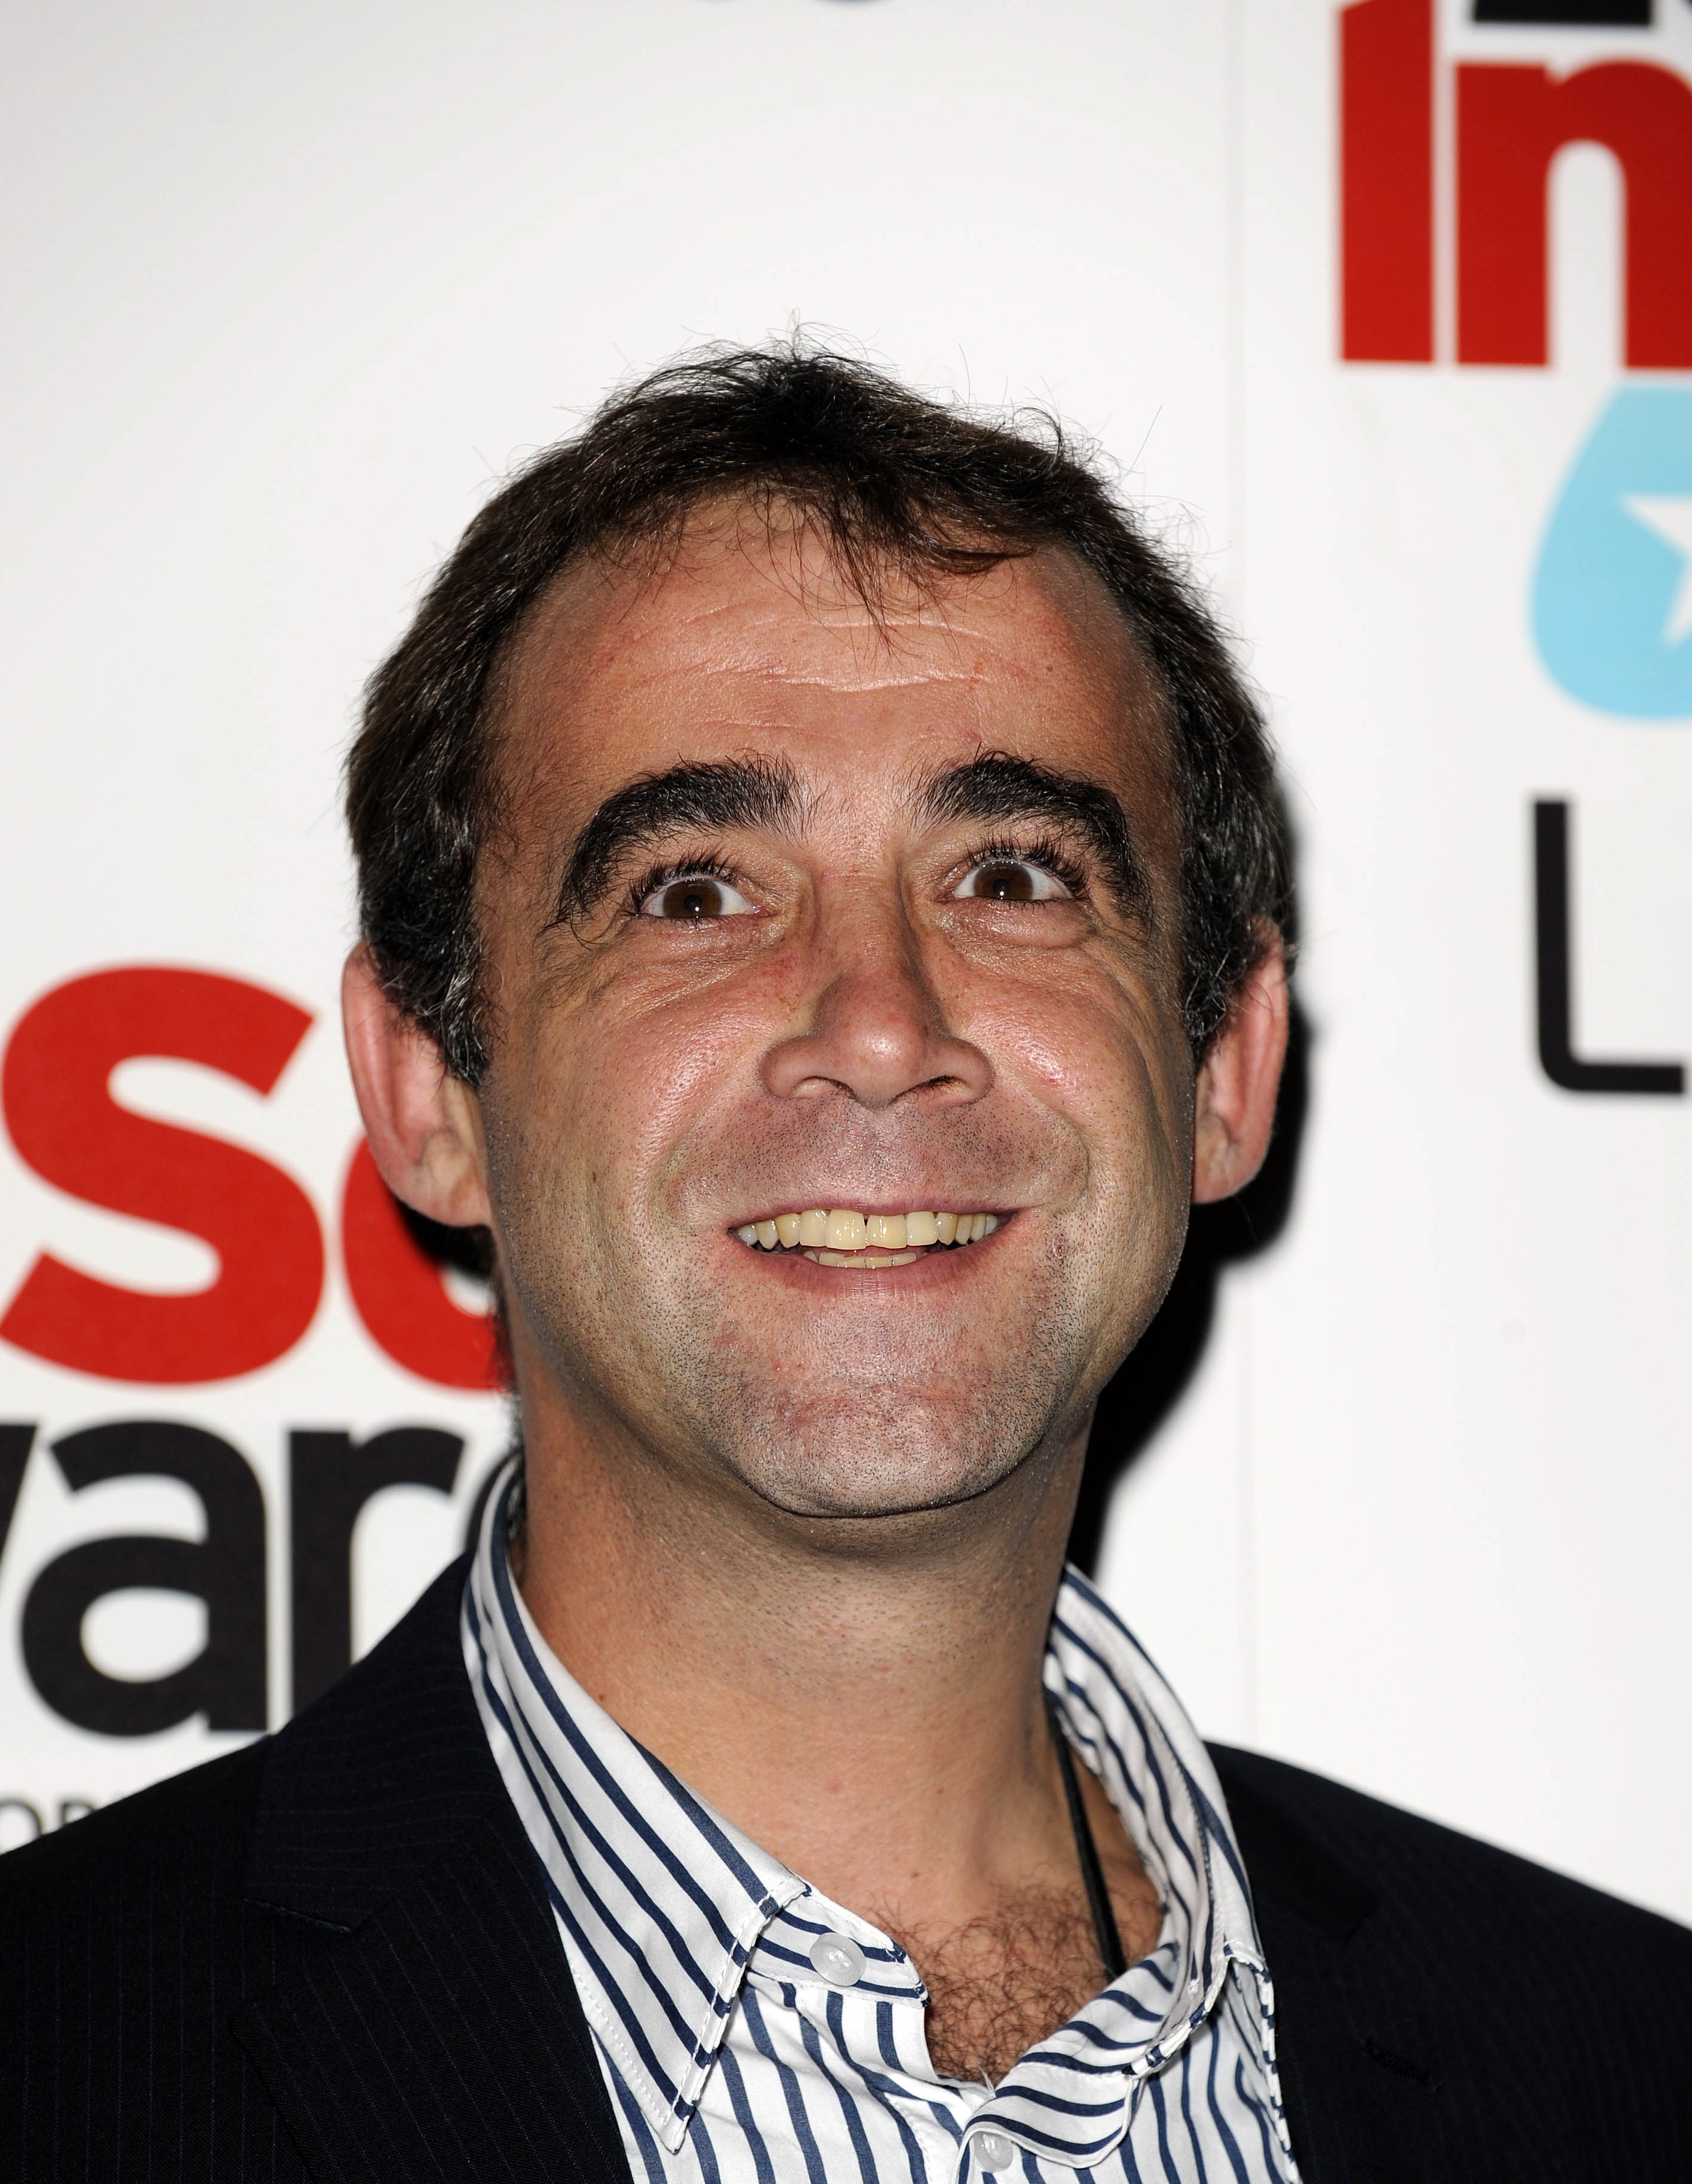 Coronation Street actor Michael Le Vell charged with child sex offences